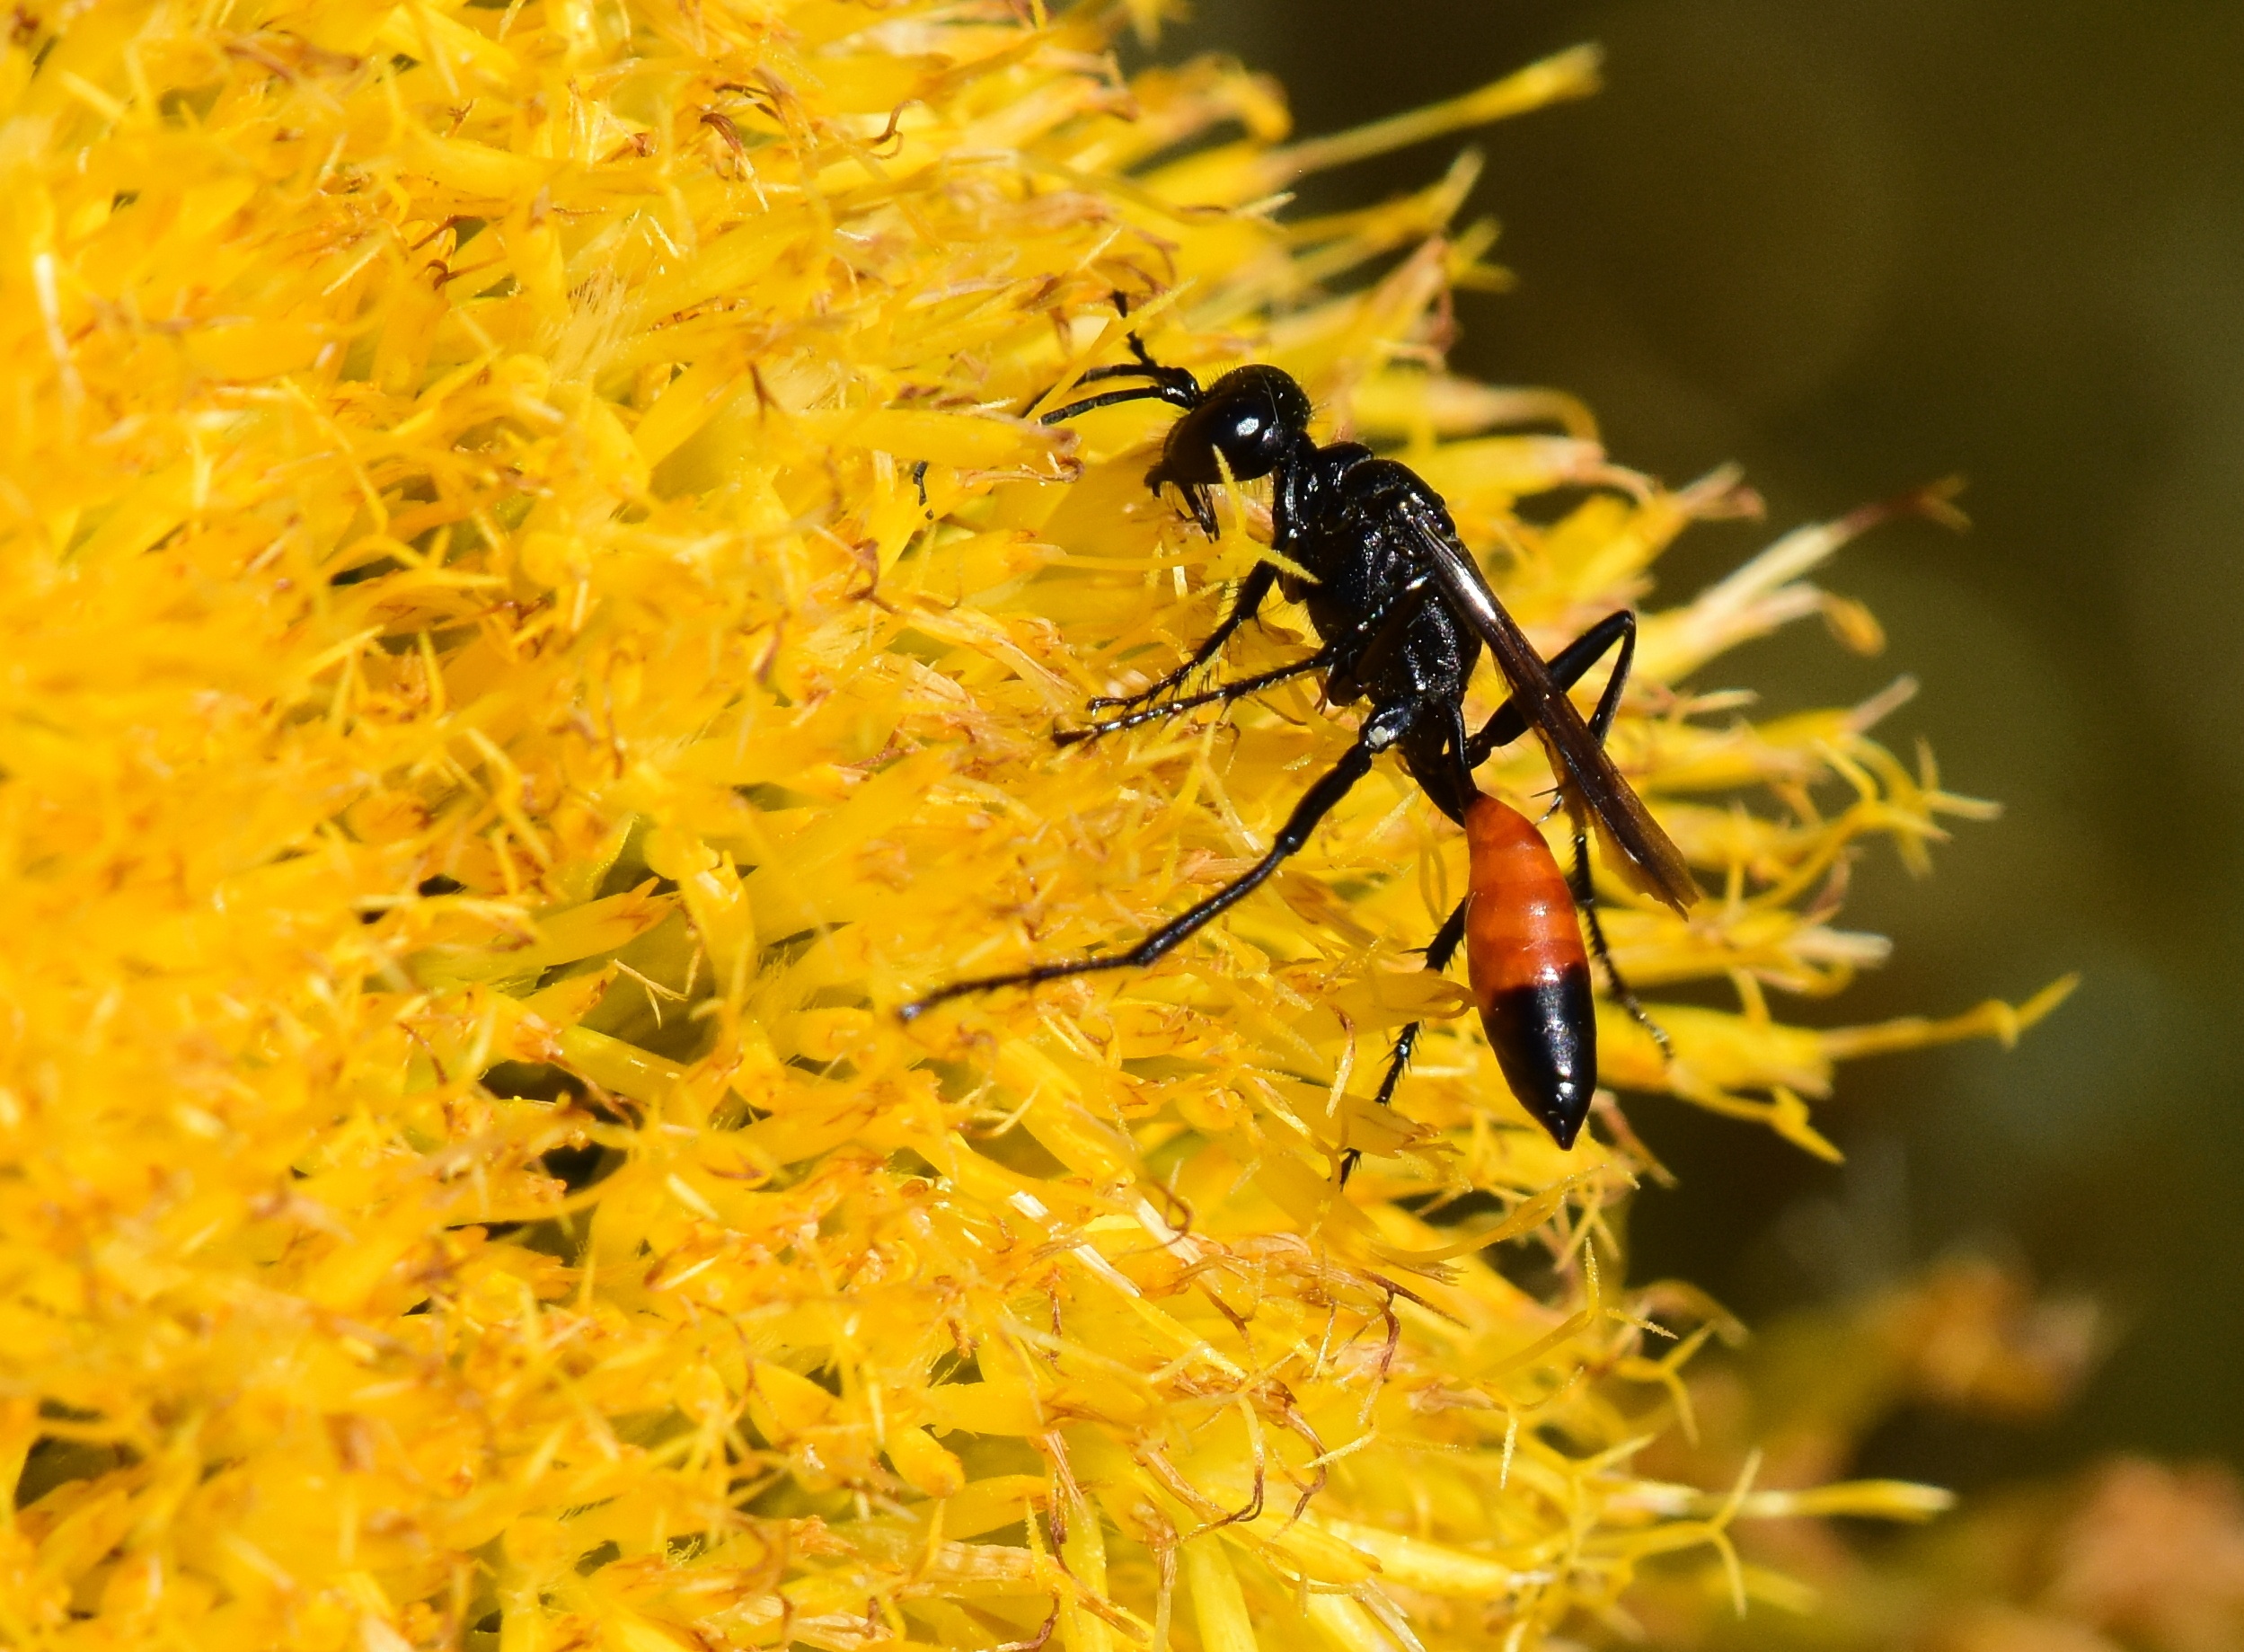 A wasp with a yellow-orange band on its lower abdomen rests on a yellow flower.